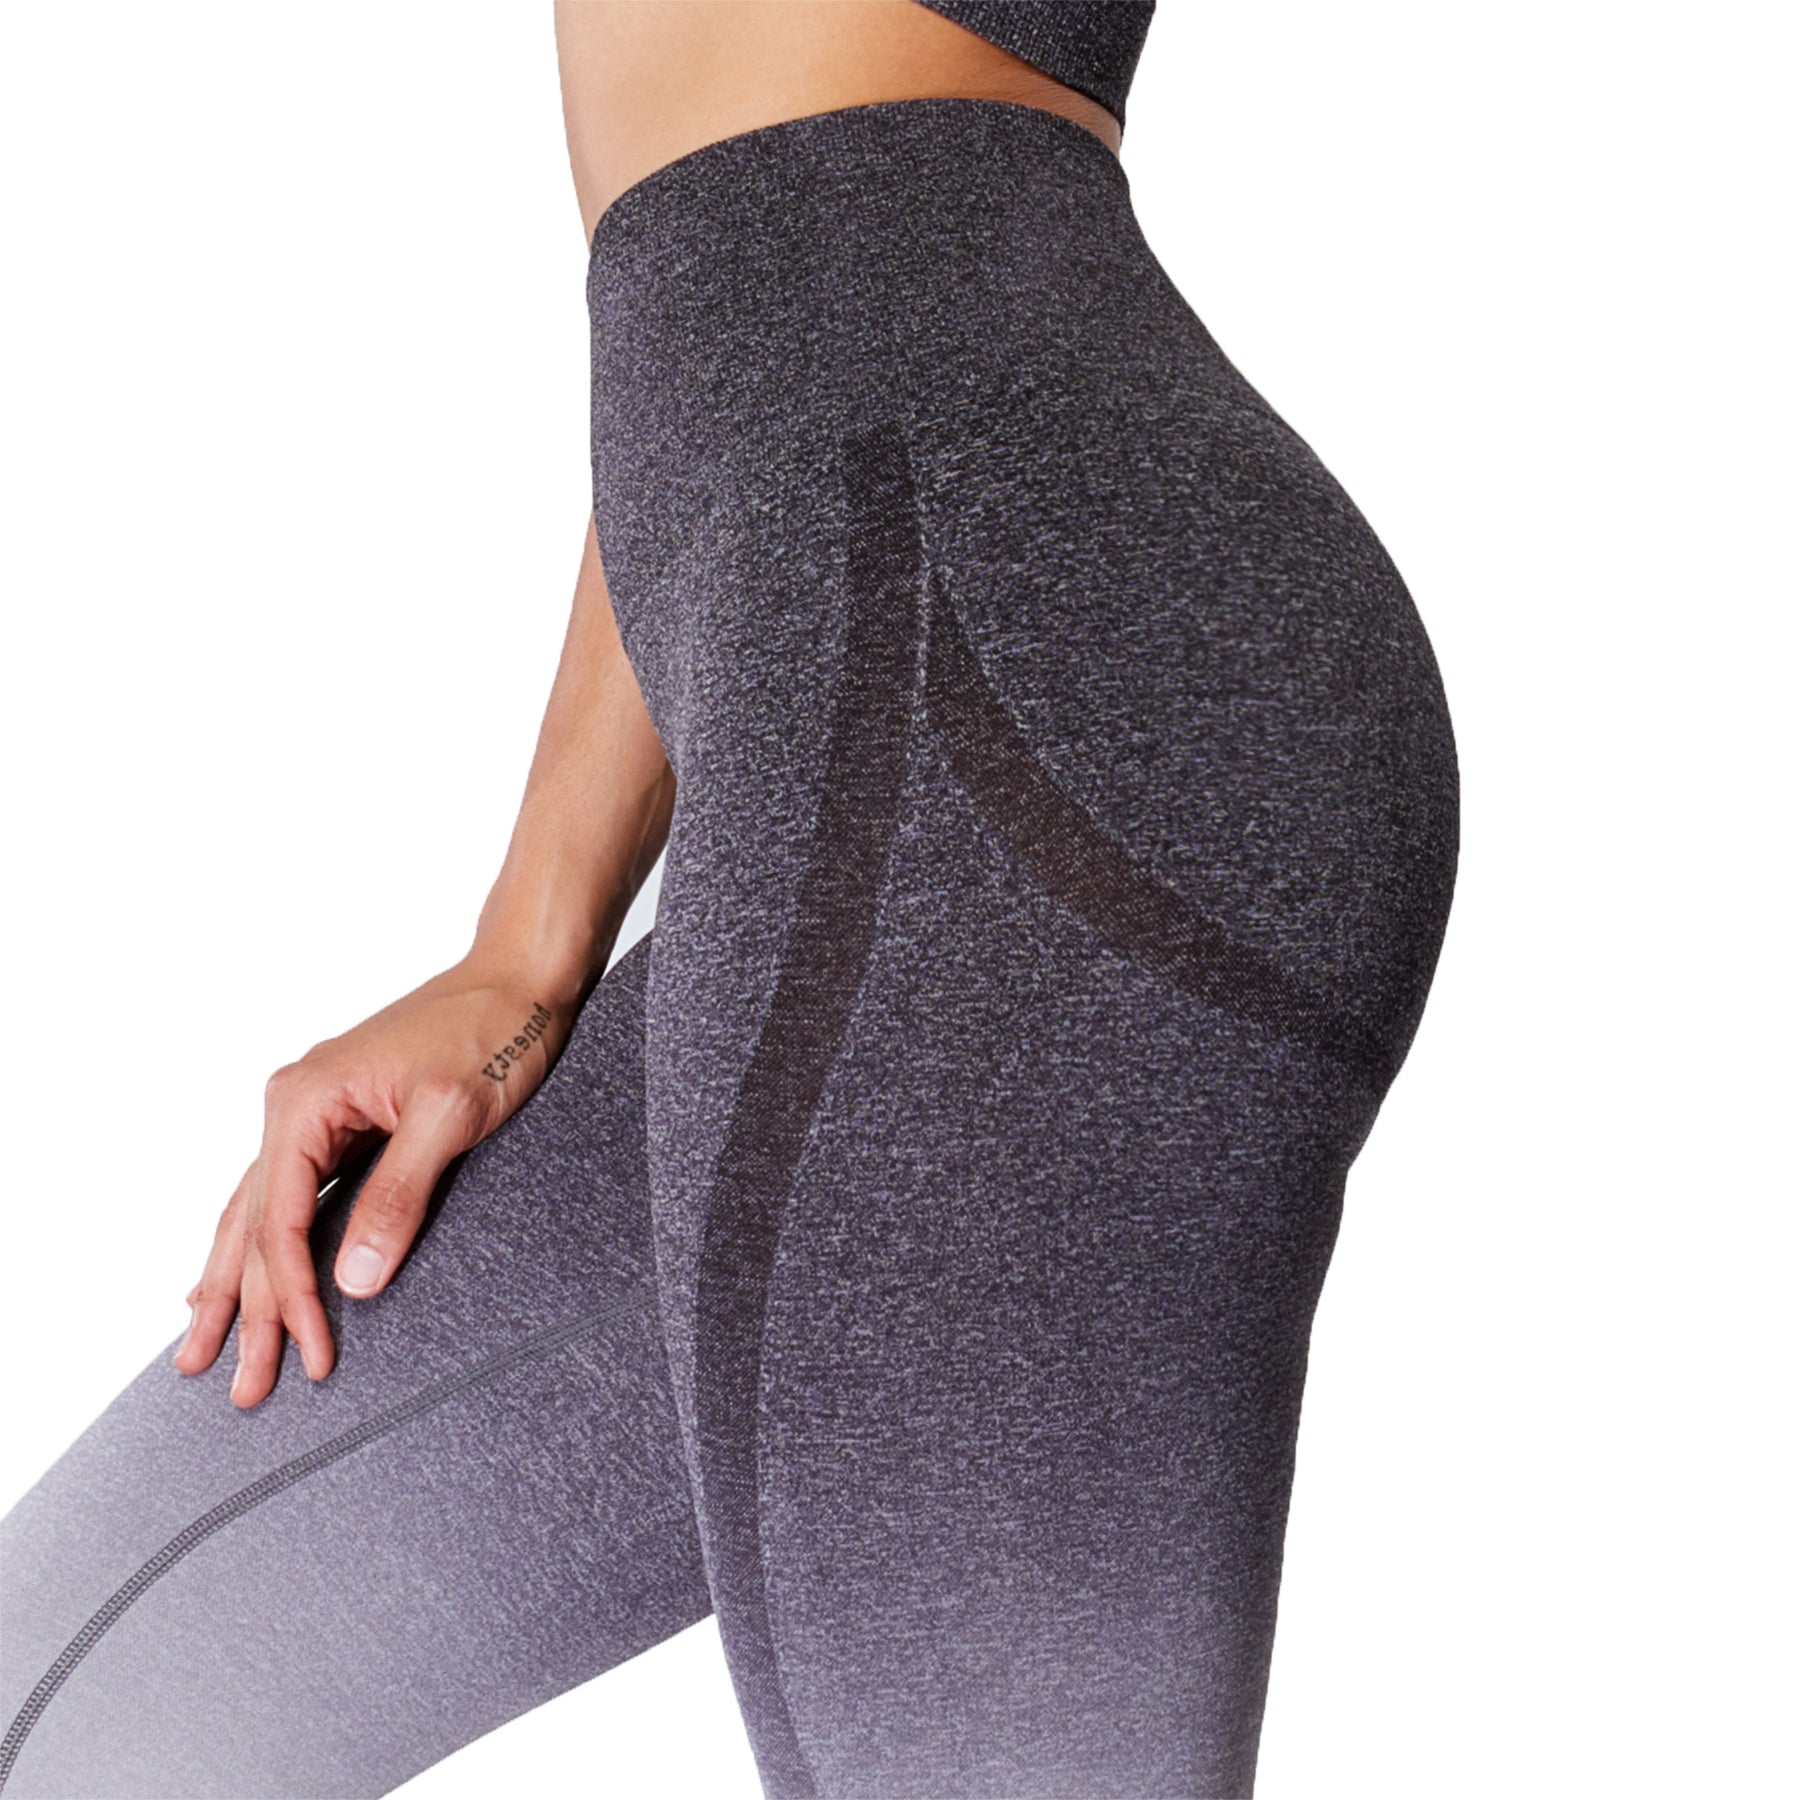  Aoxjox High Waisted Workout Leggings For Women Tummy Control  Buttery Soft Yoga Metamorph Deep V Pants 27